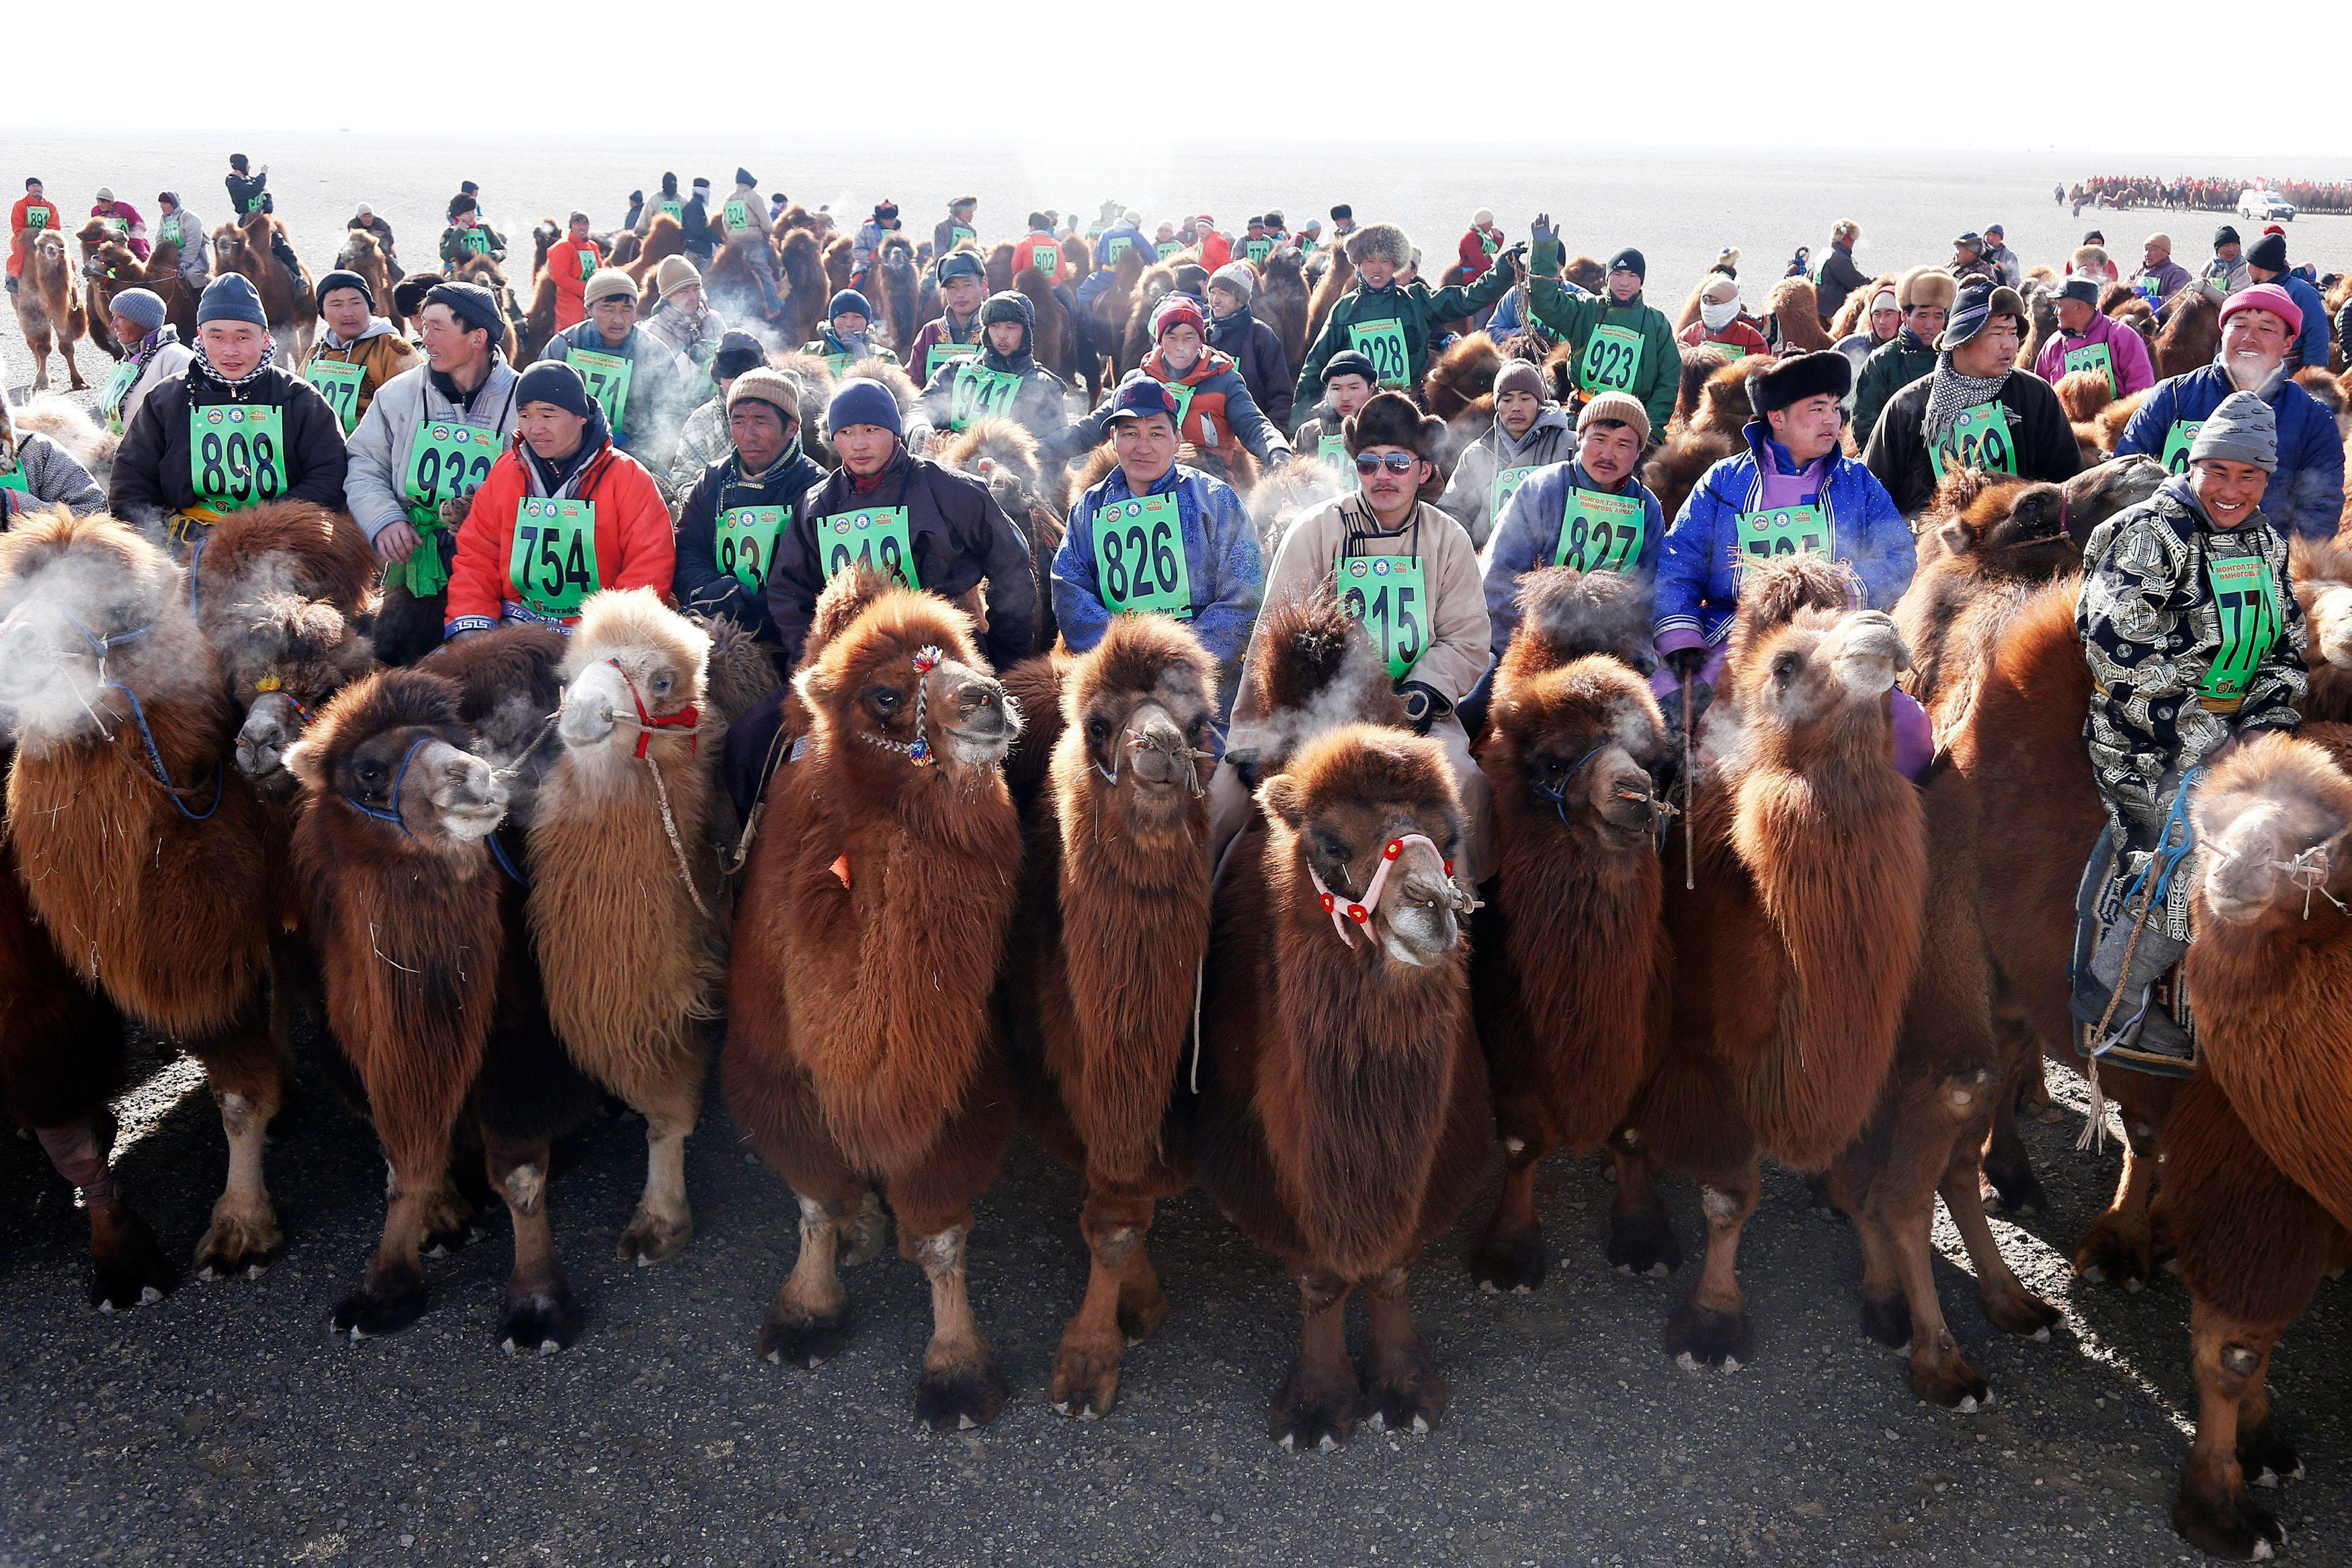 The Wider Image: Mongolia's camel festival